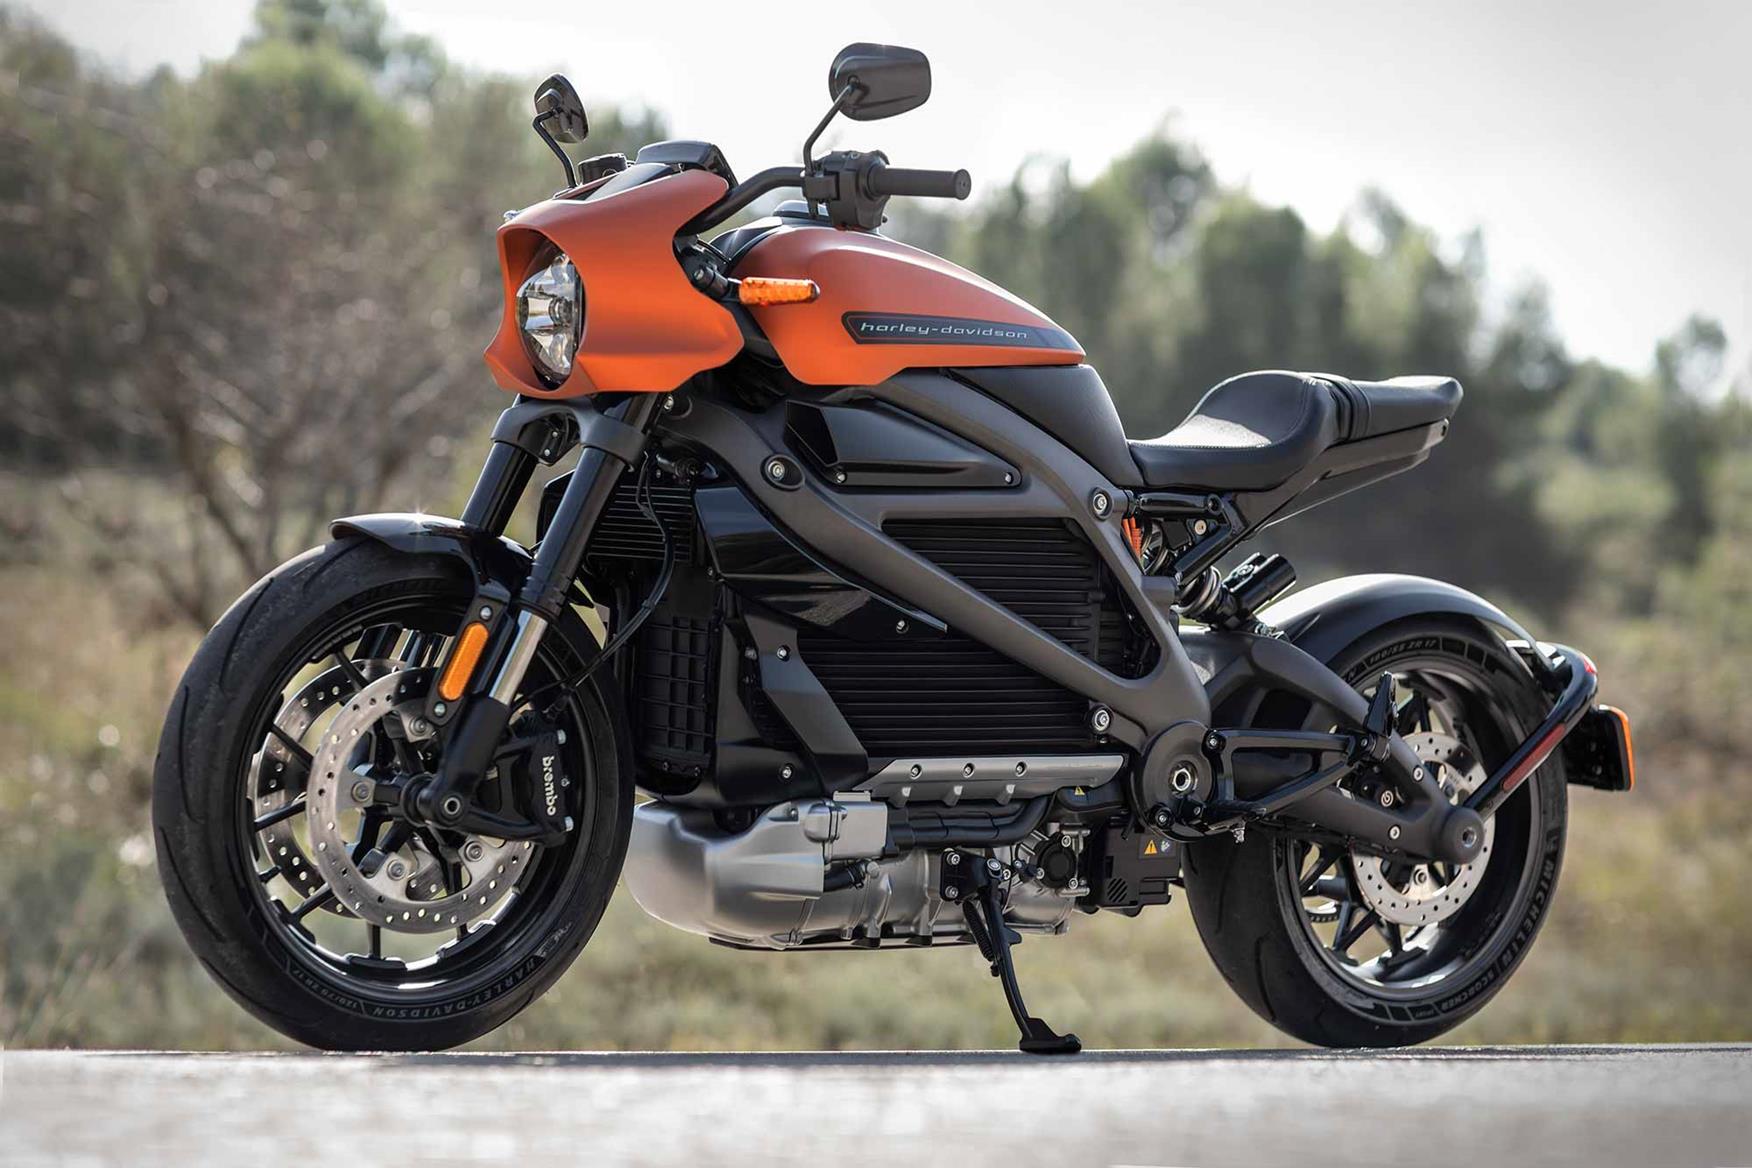 Livewire One Is Harley Davidson S Second Chance At Electric Motorcycle Dominance The Verge